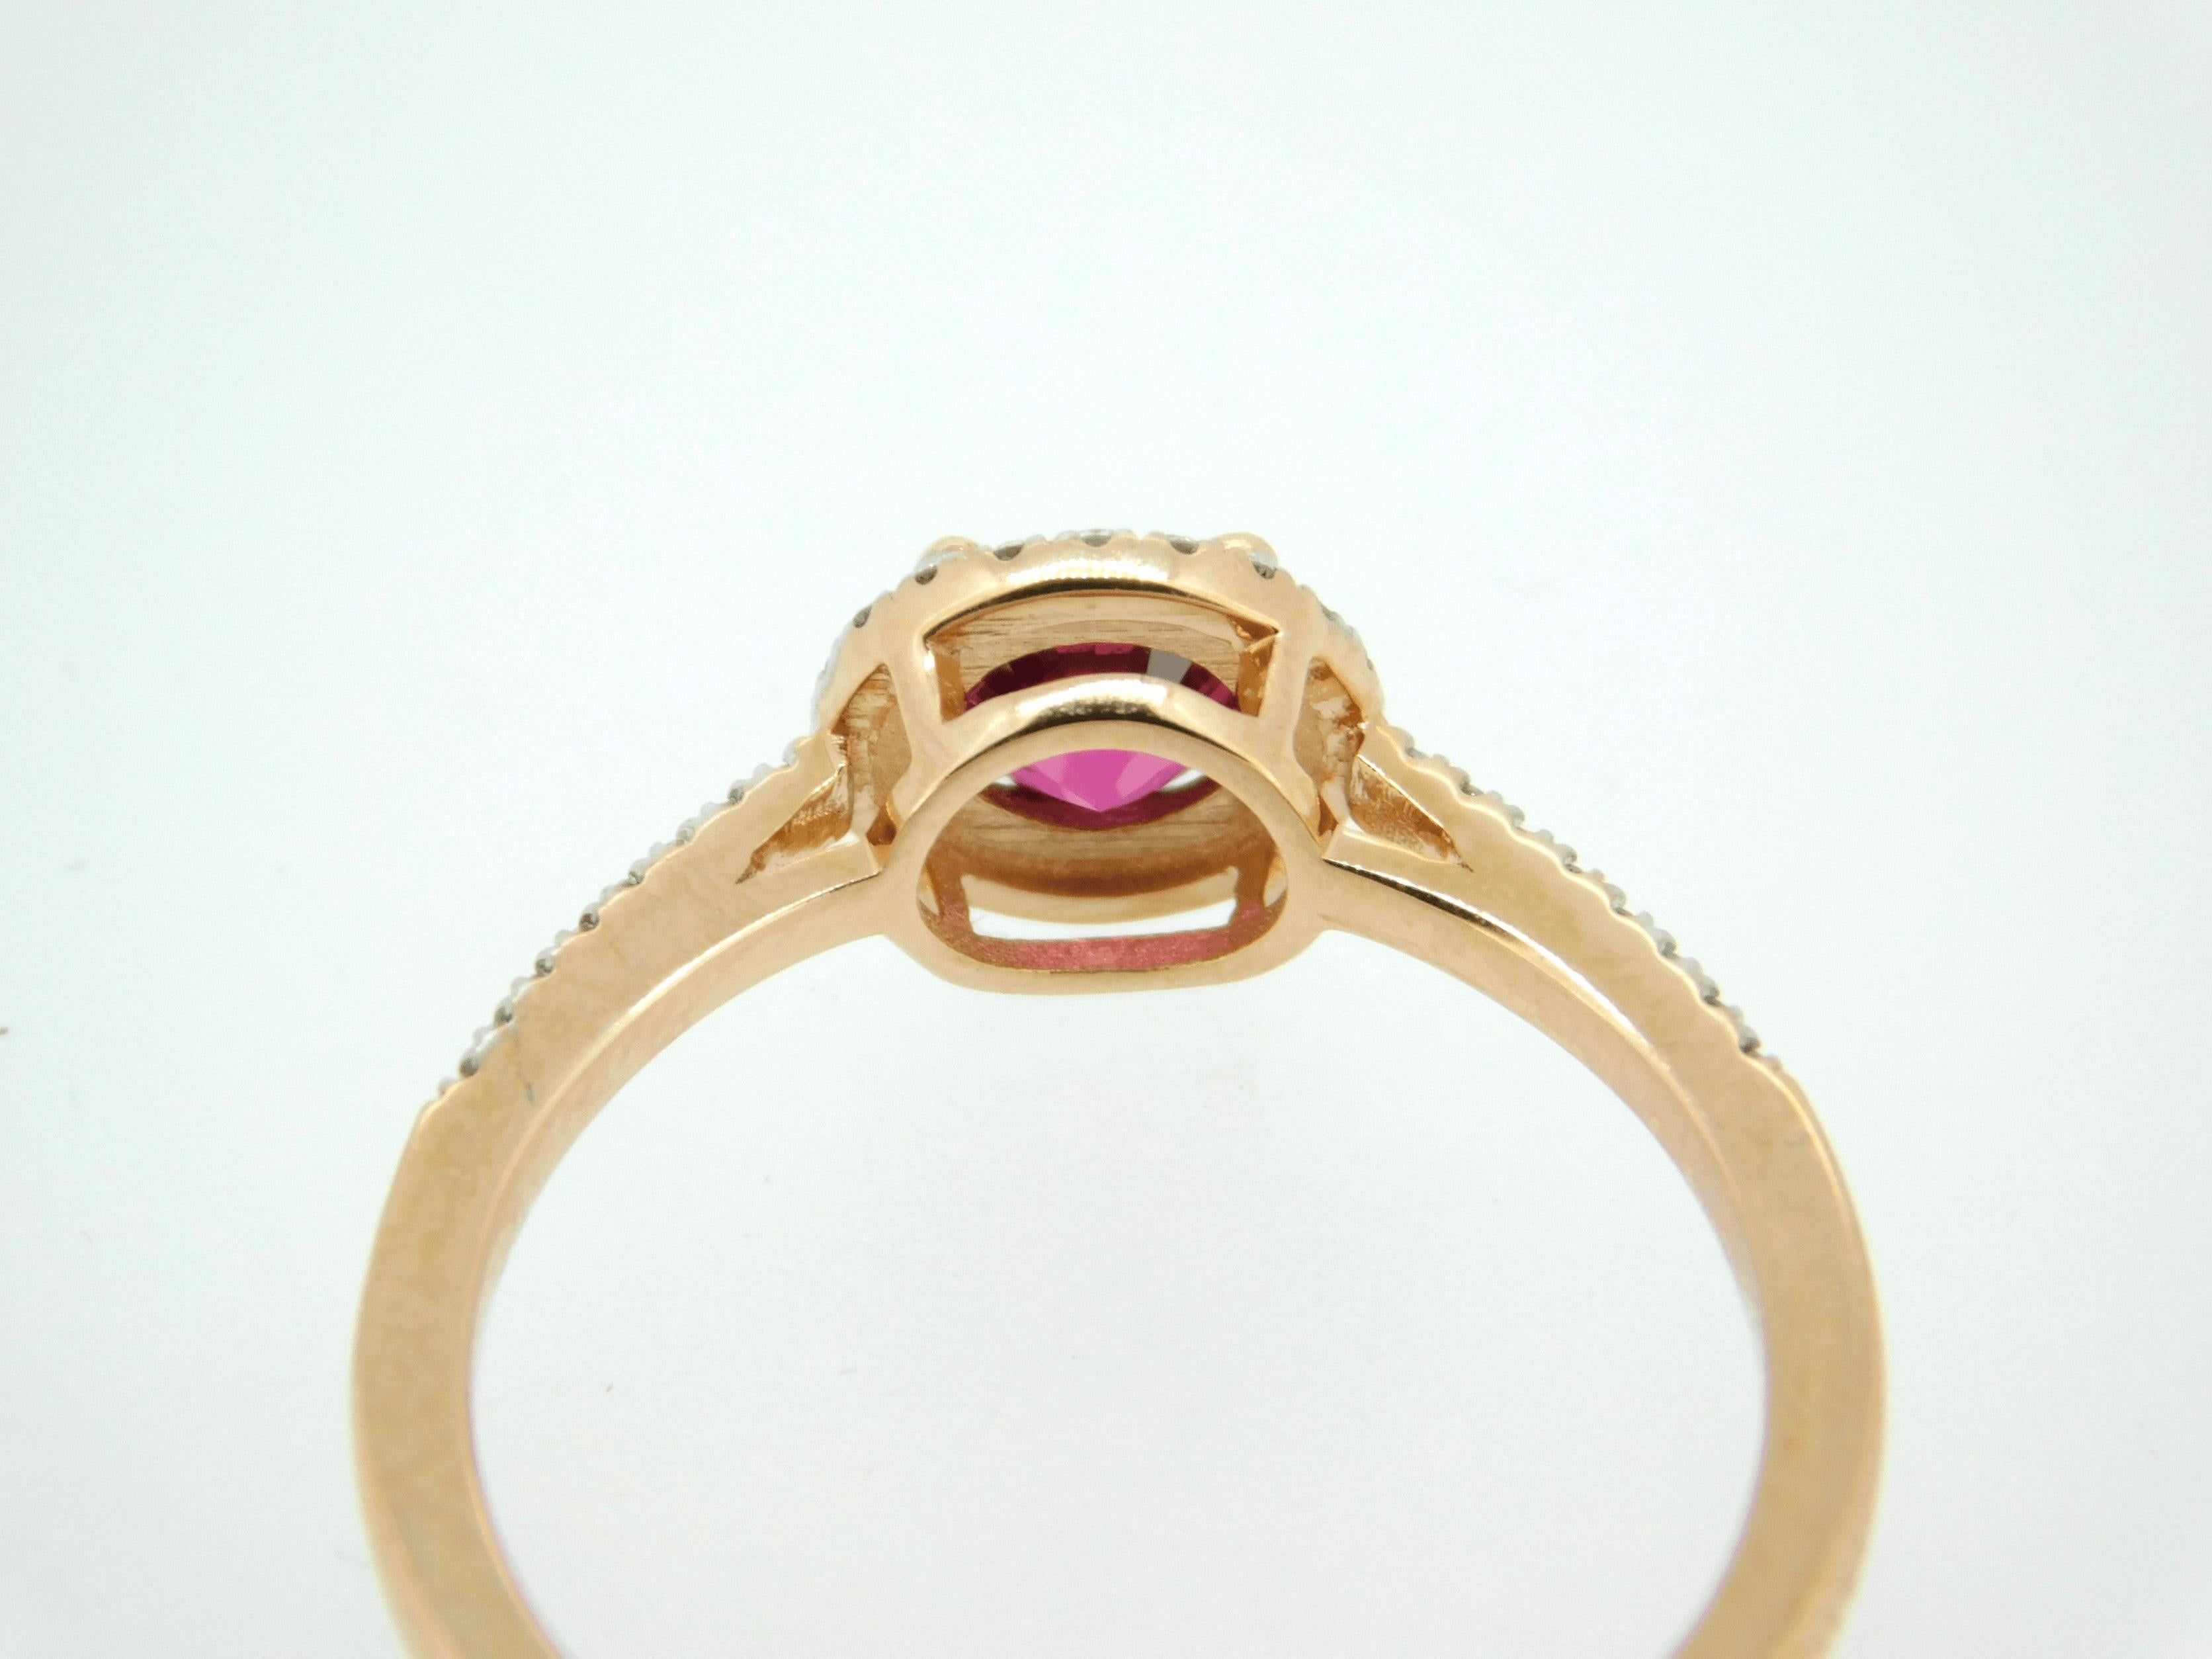 Square Cut 14k Rose Gold .72ct Pink Genuine Natural Sapphire Ring with Diamond Halo #J4450 For Sale